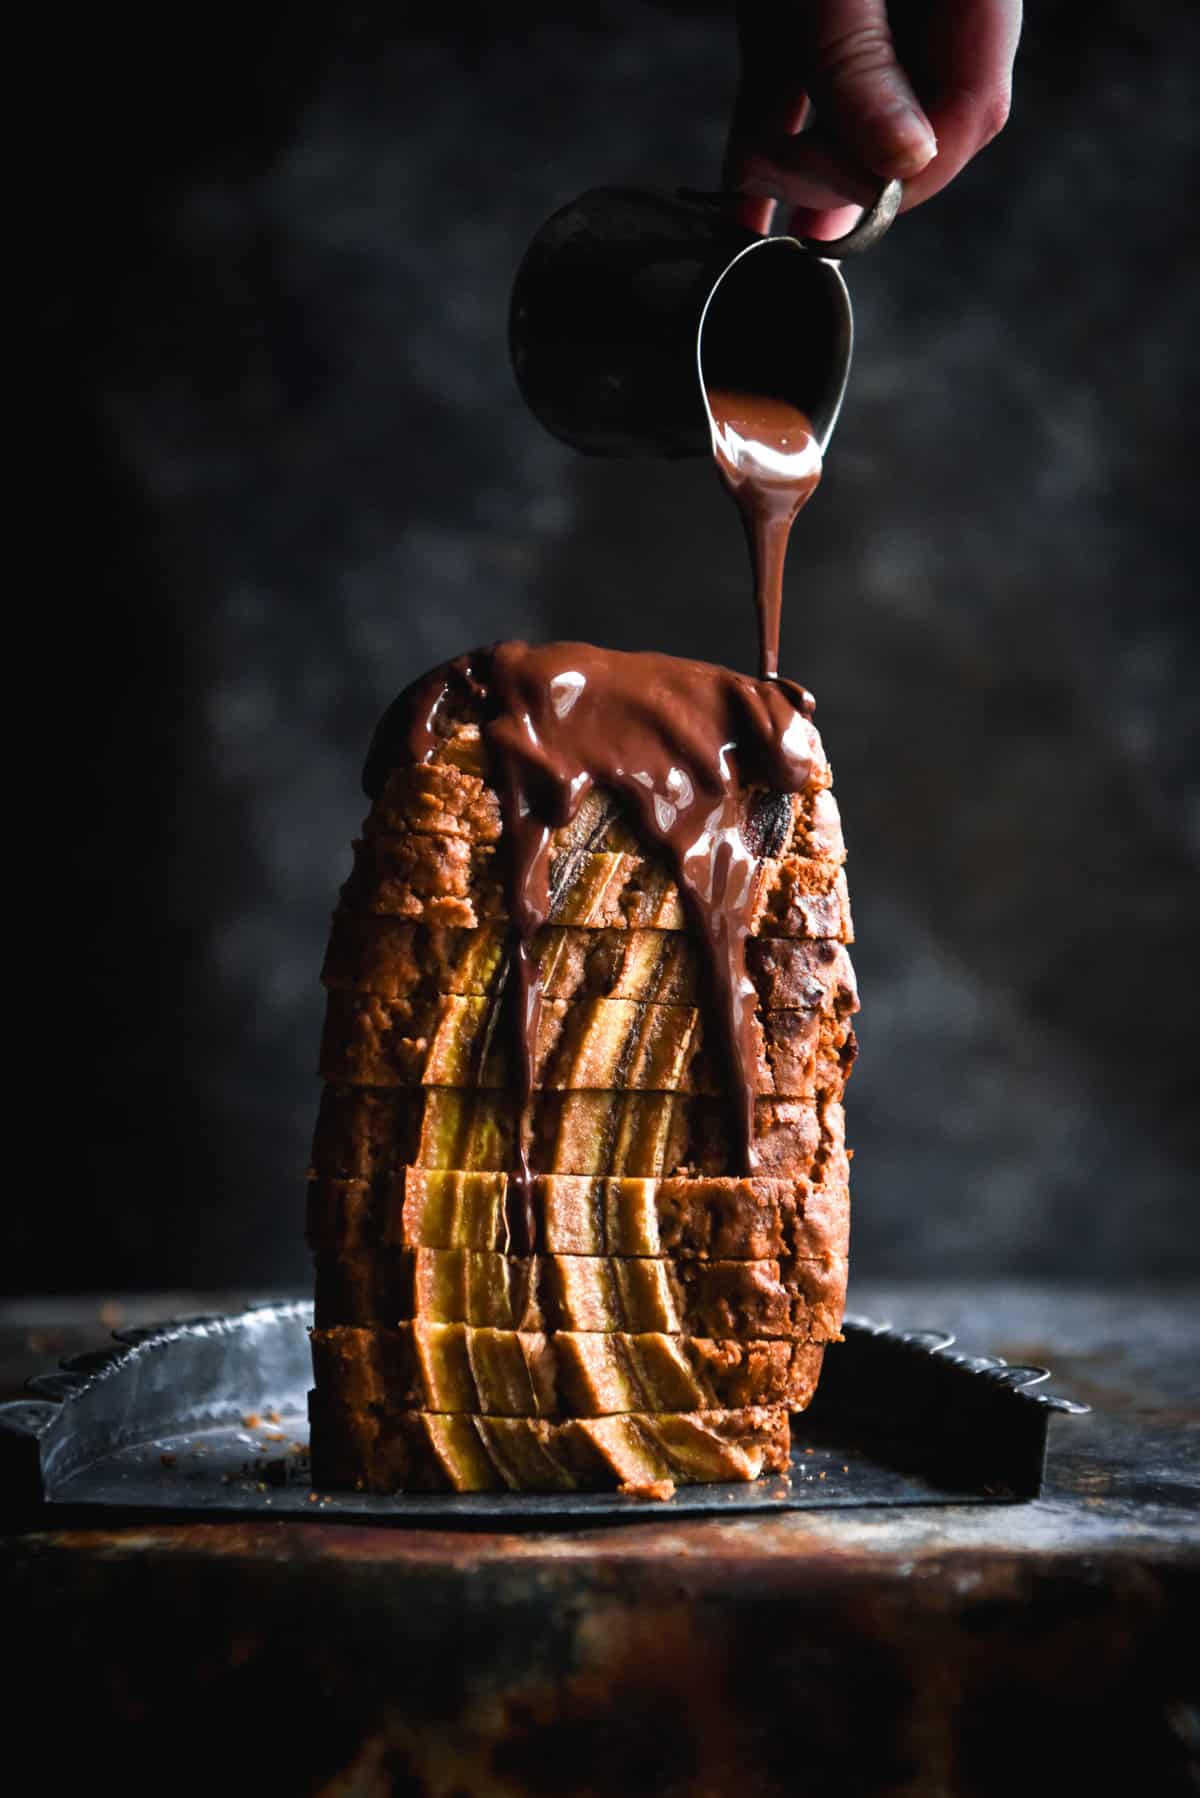 A side on view of a sliced loaf of banana bread standing upright against a dark blue backdrop. A hand extends out from the top right of the image to drizzle vegan chocolate sauce down the loaf.